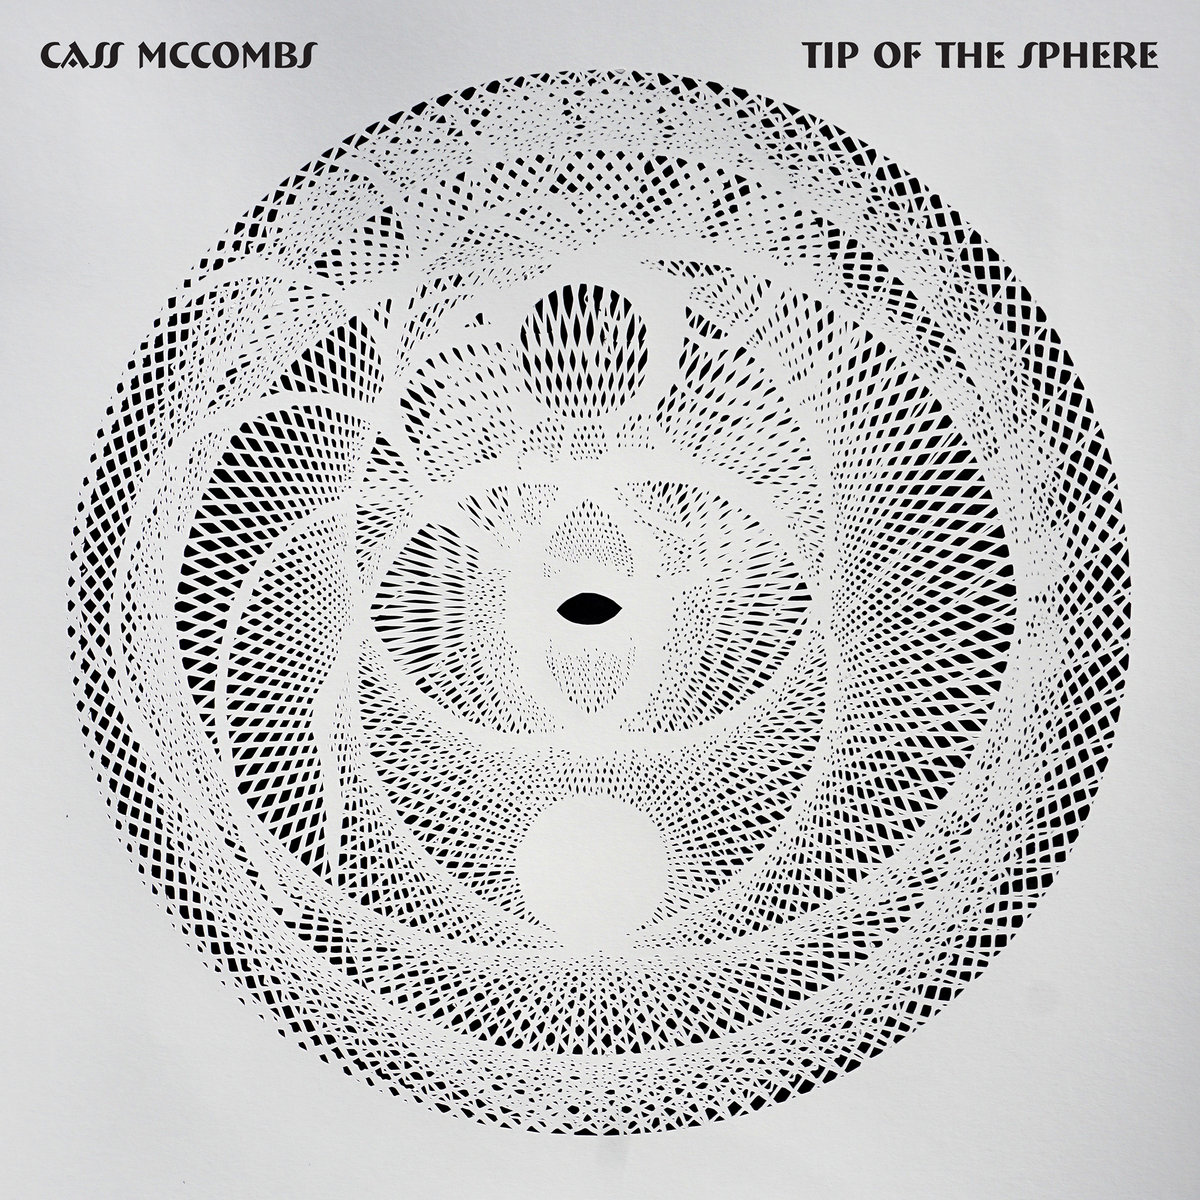 'Tip Of The Sphere' by Cass McCombs, album review by Matthew Wardell for Northern Transmissions out 2/8 via ANTI-Records